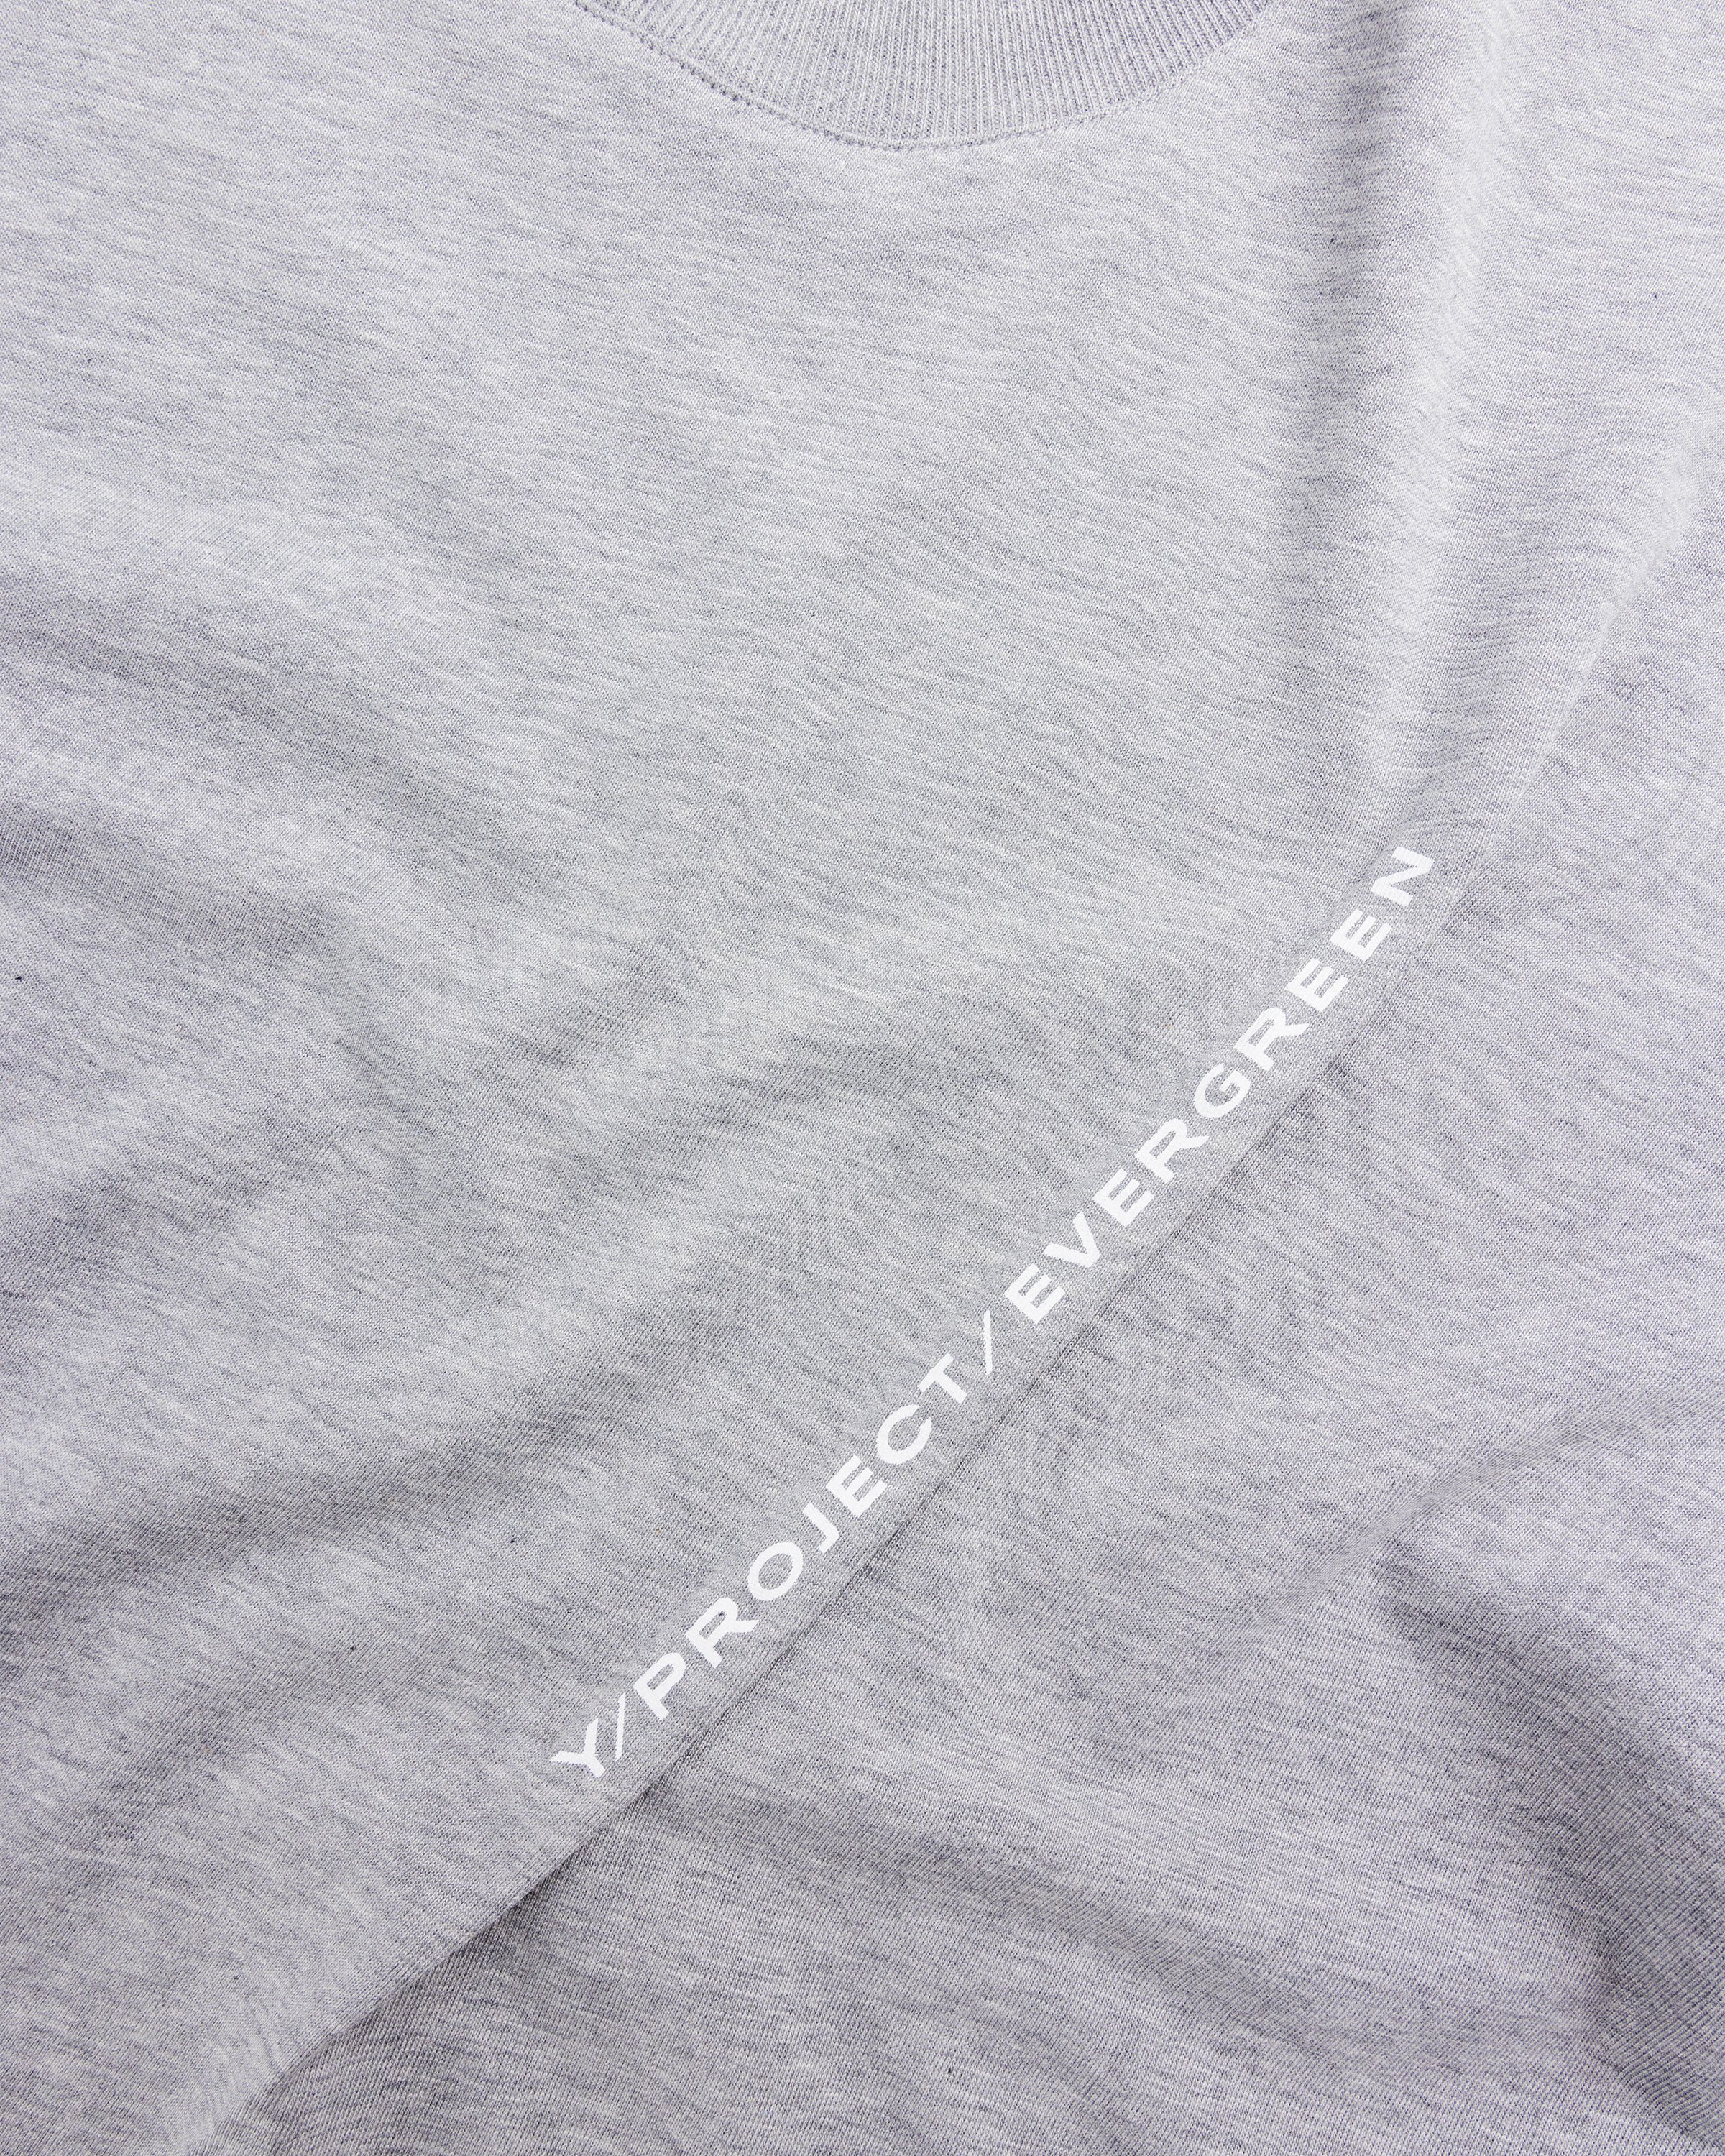 Y/Project - Evergreen Pinched Logo T-Shirt Evergreen Grey Melange - Clothing - Grey - Image 7